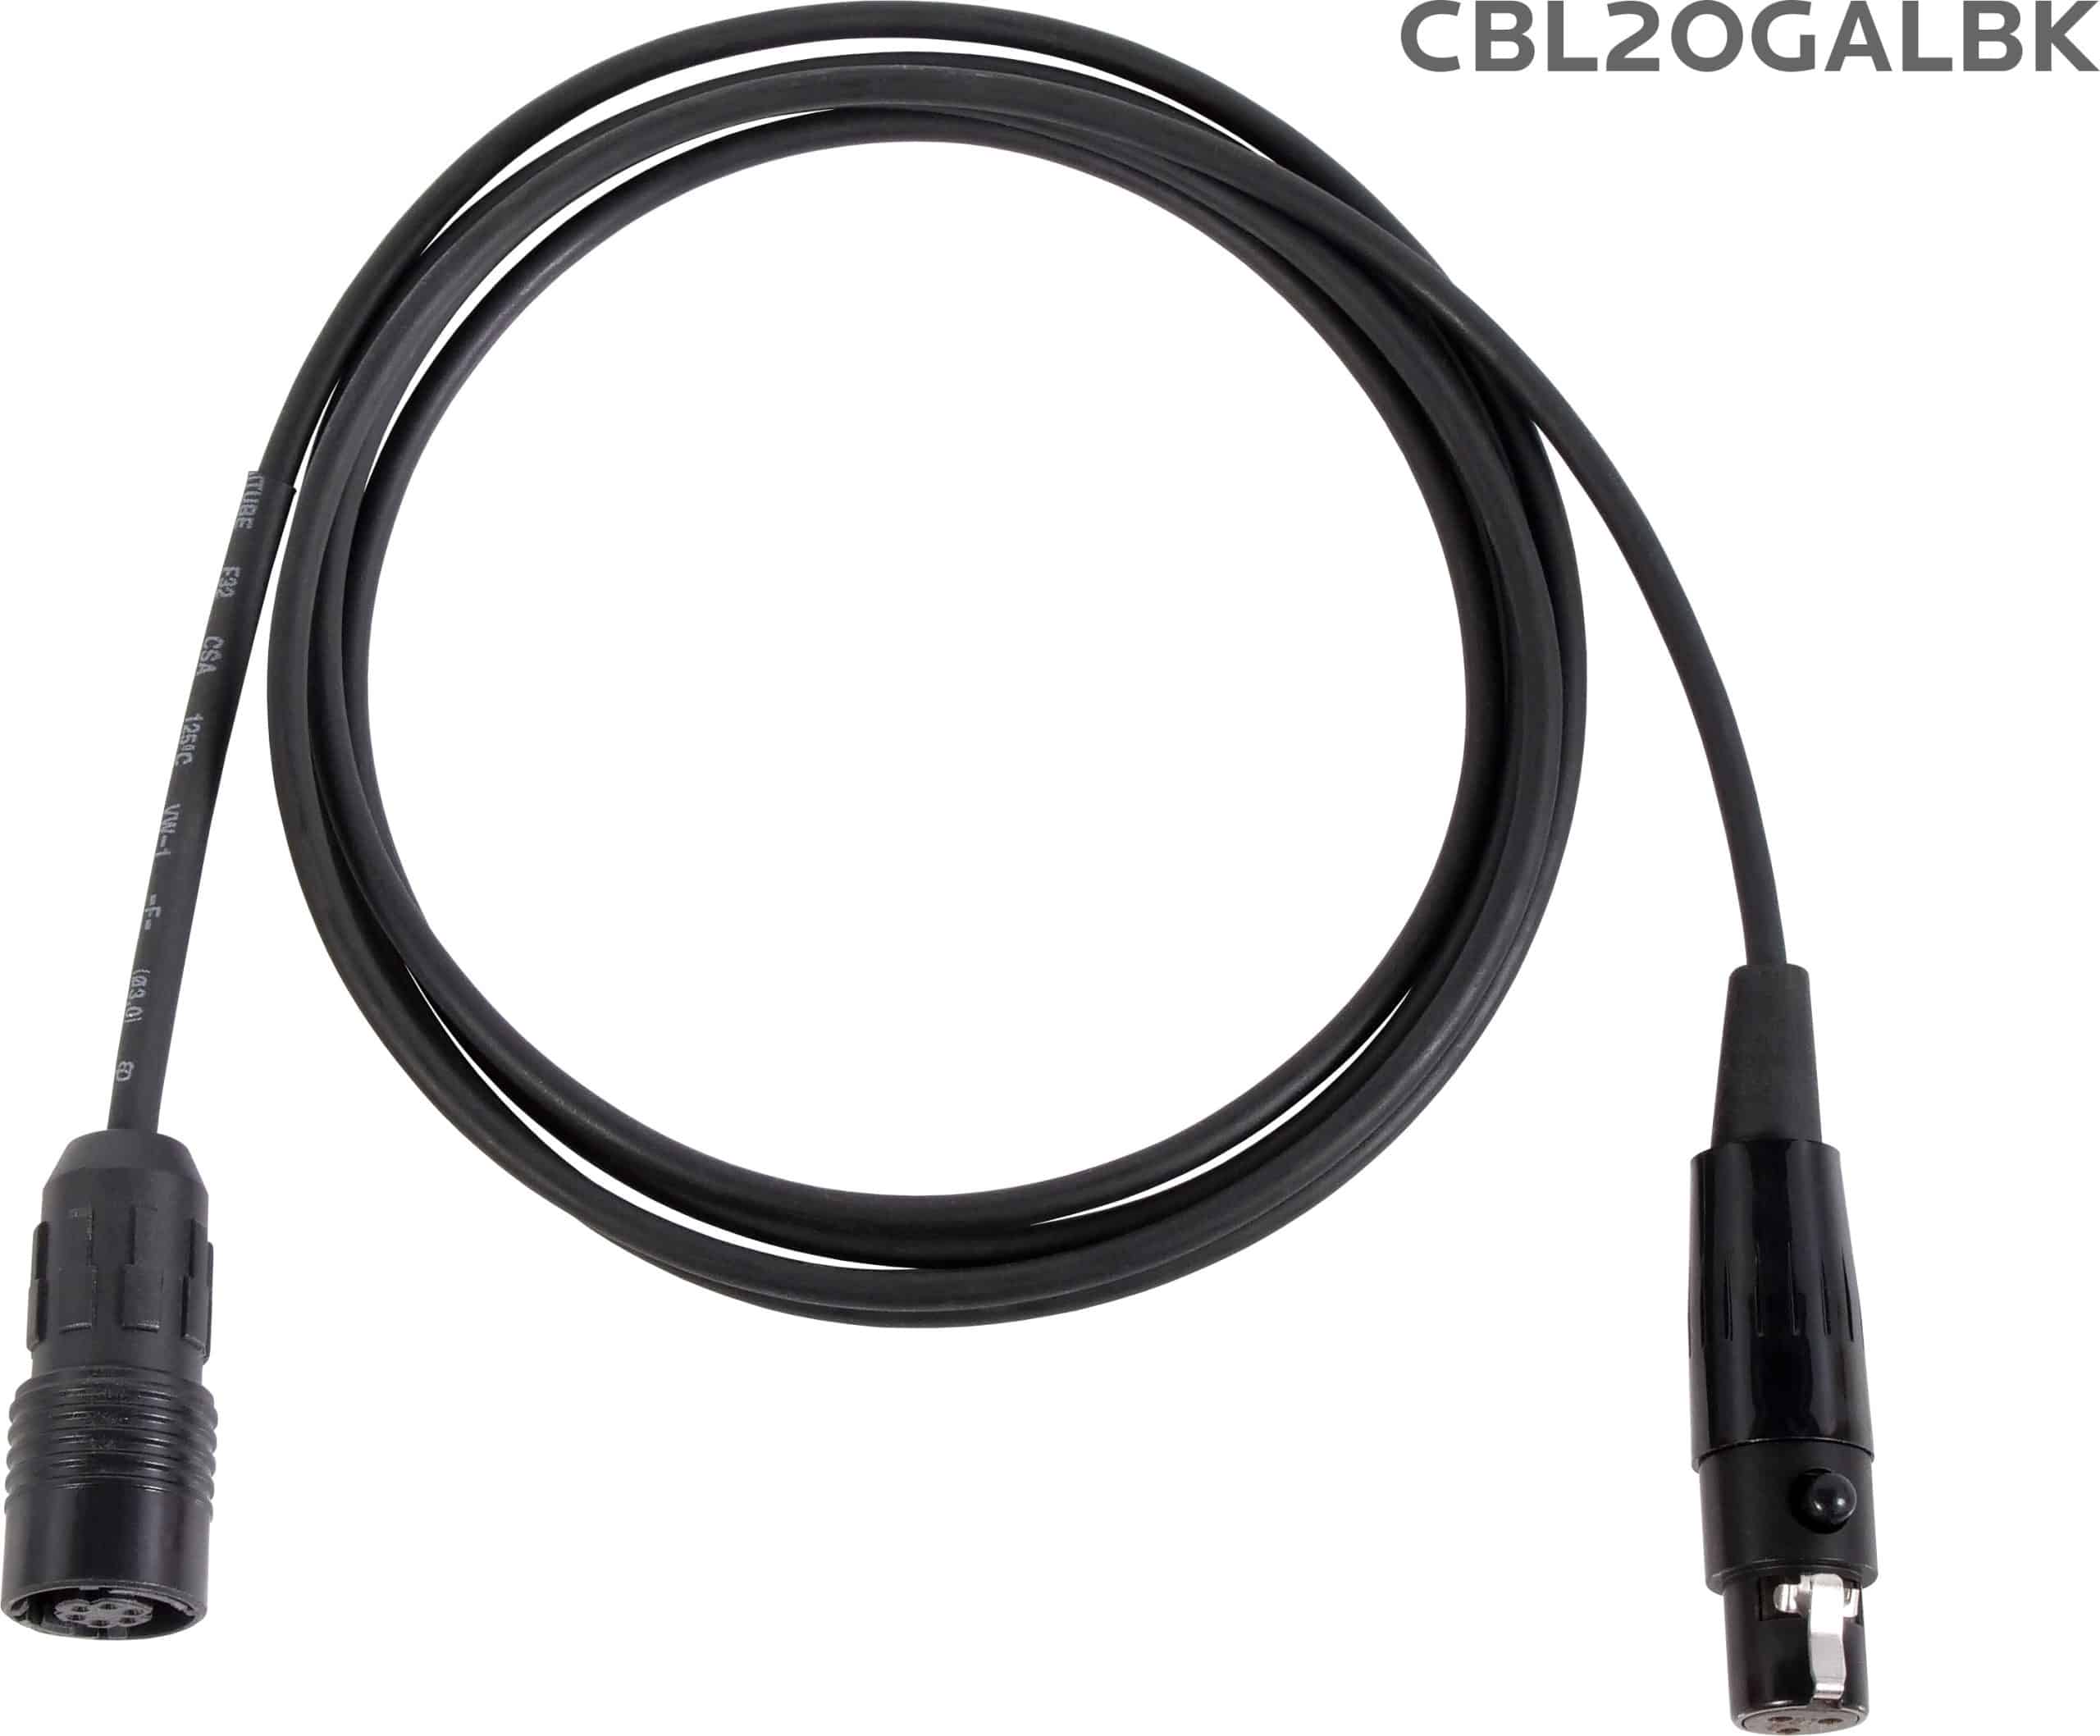 Replacement cable for H2O7 Wireless Headset Mic. The cable is wired to work with Galaxy Audio® systems.